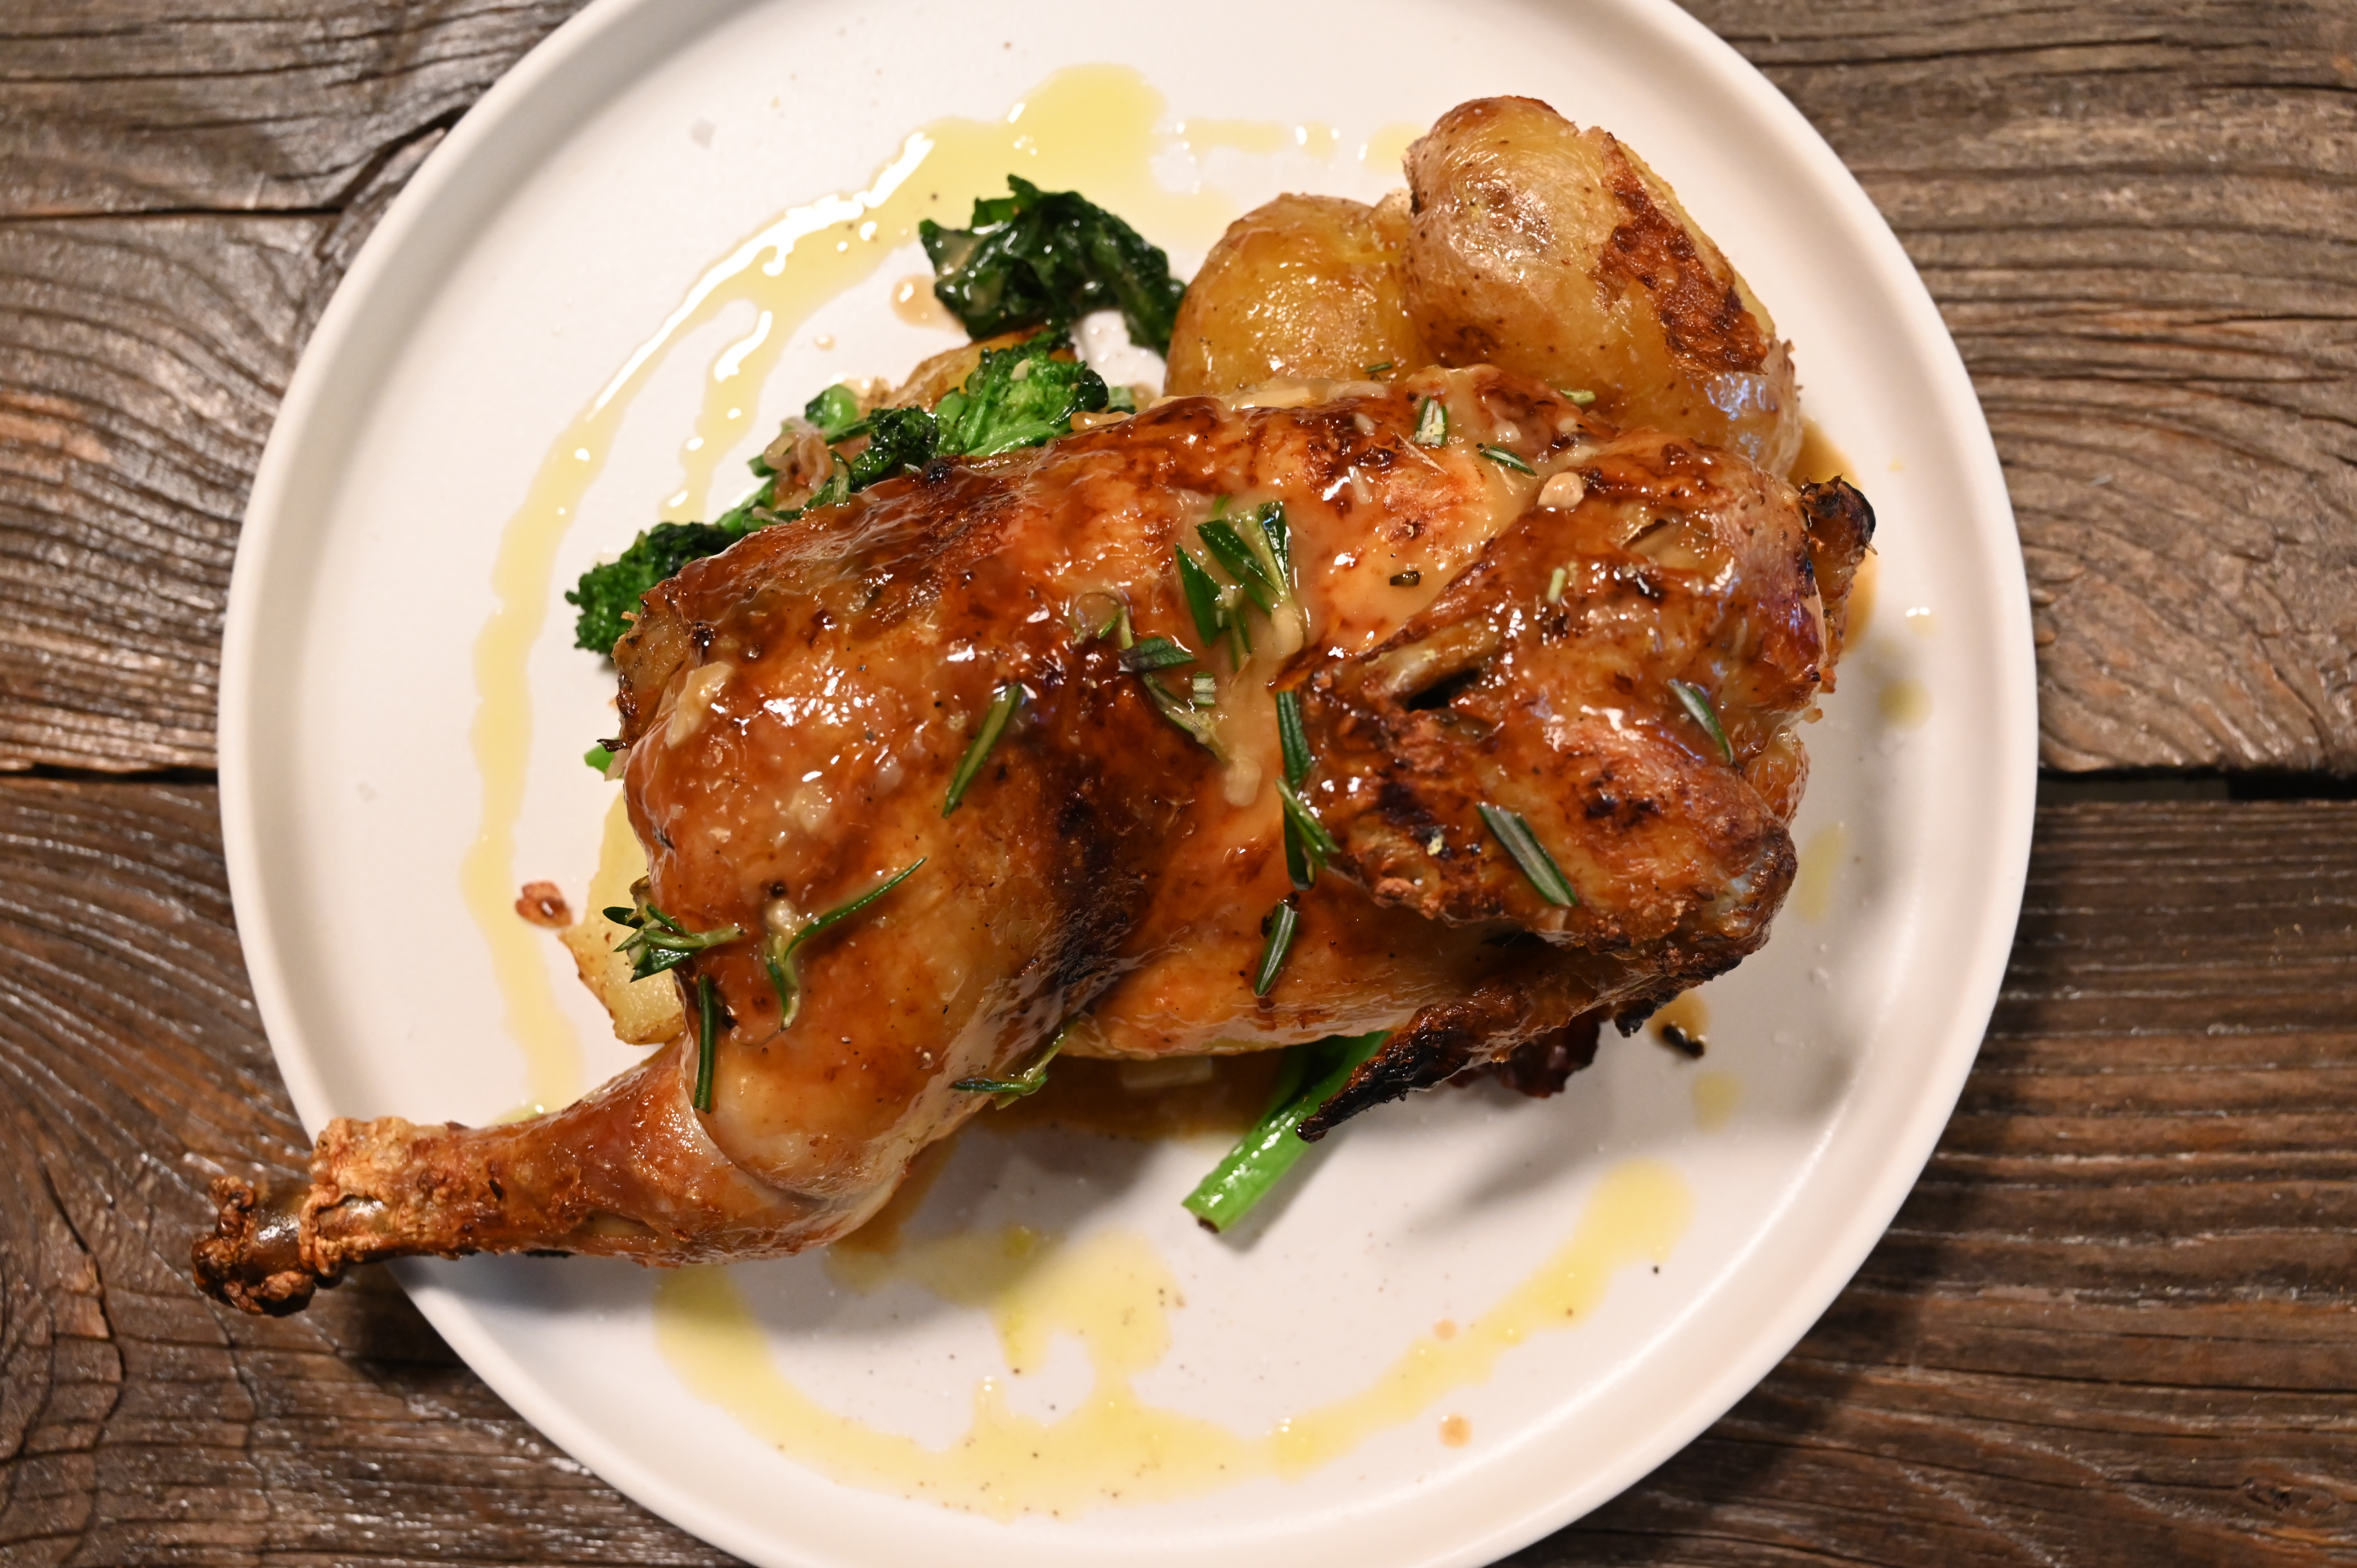 This is a photo of Posto Italian's wood roasted half chicken